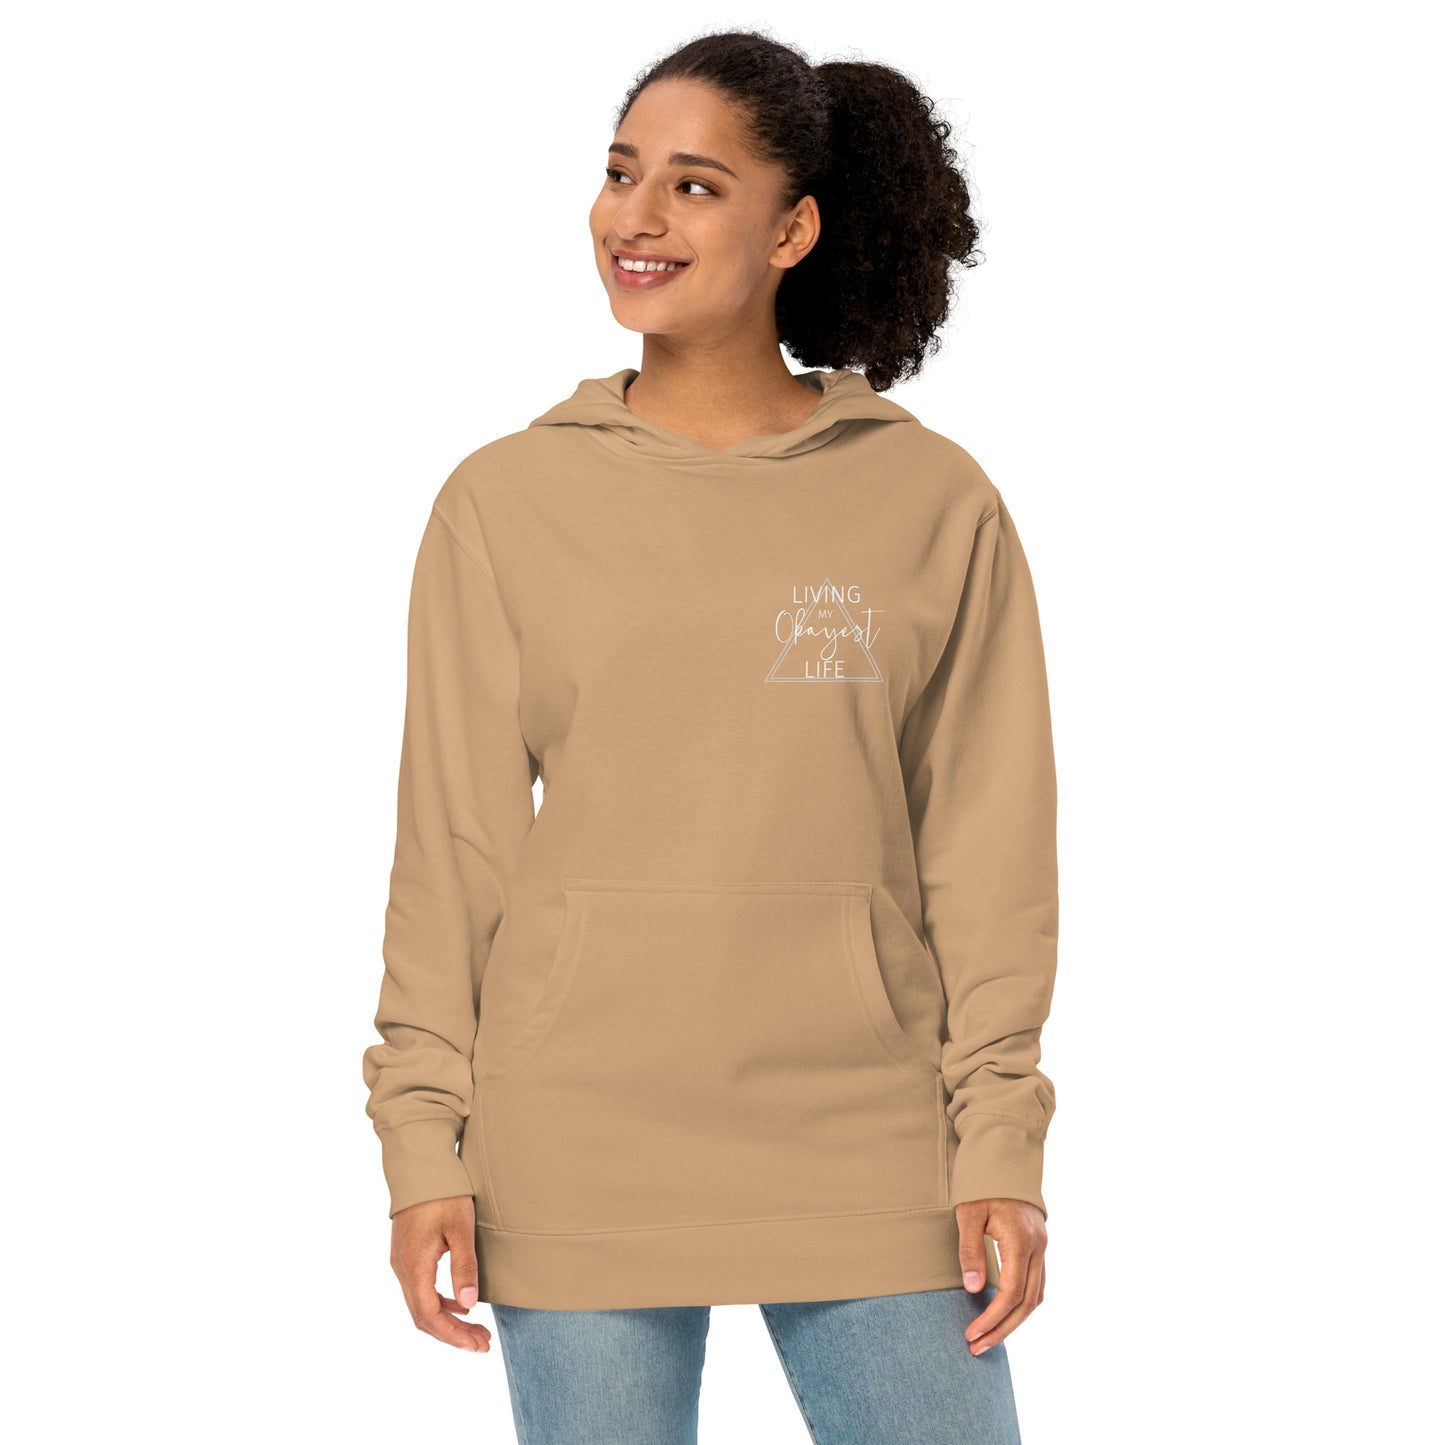 Okayest Life Triangle Unisex midweight hoodie